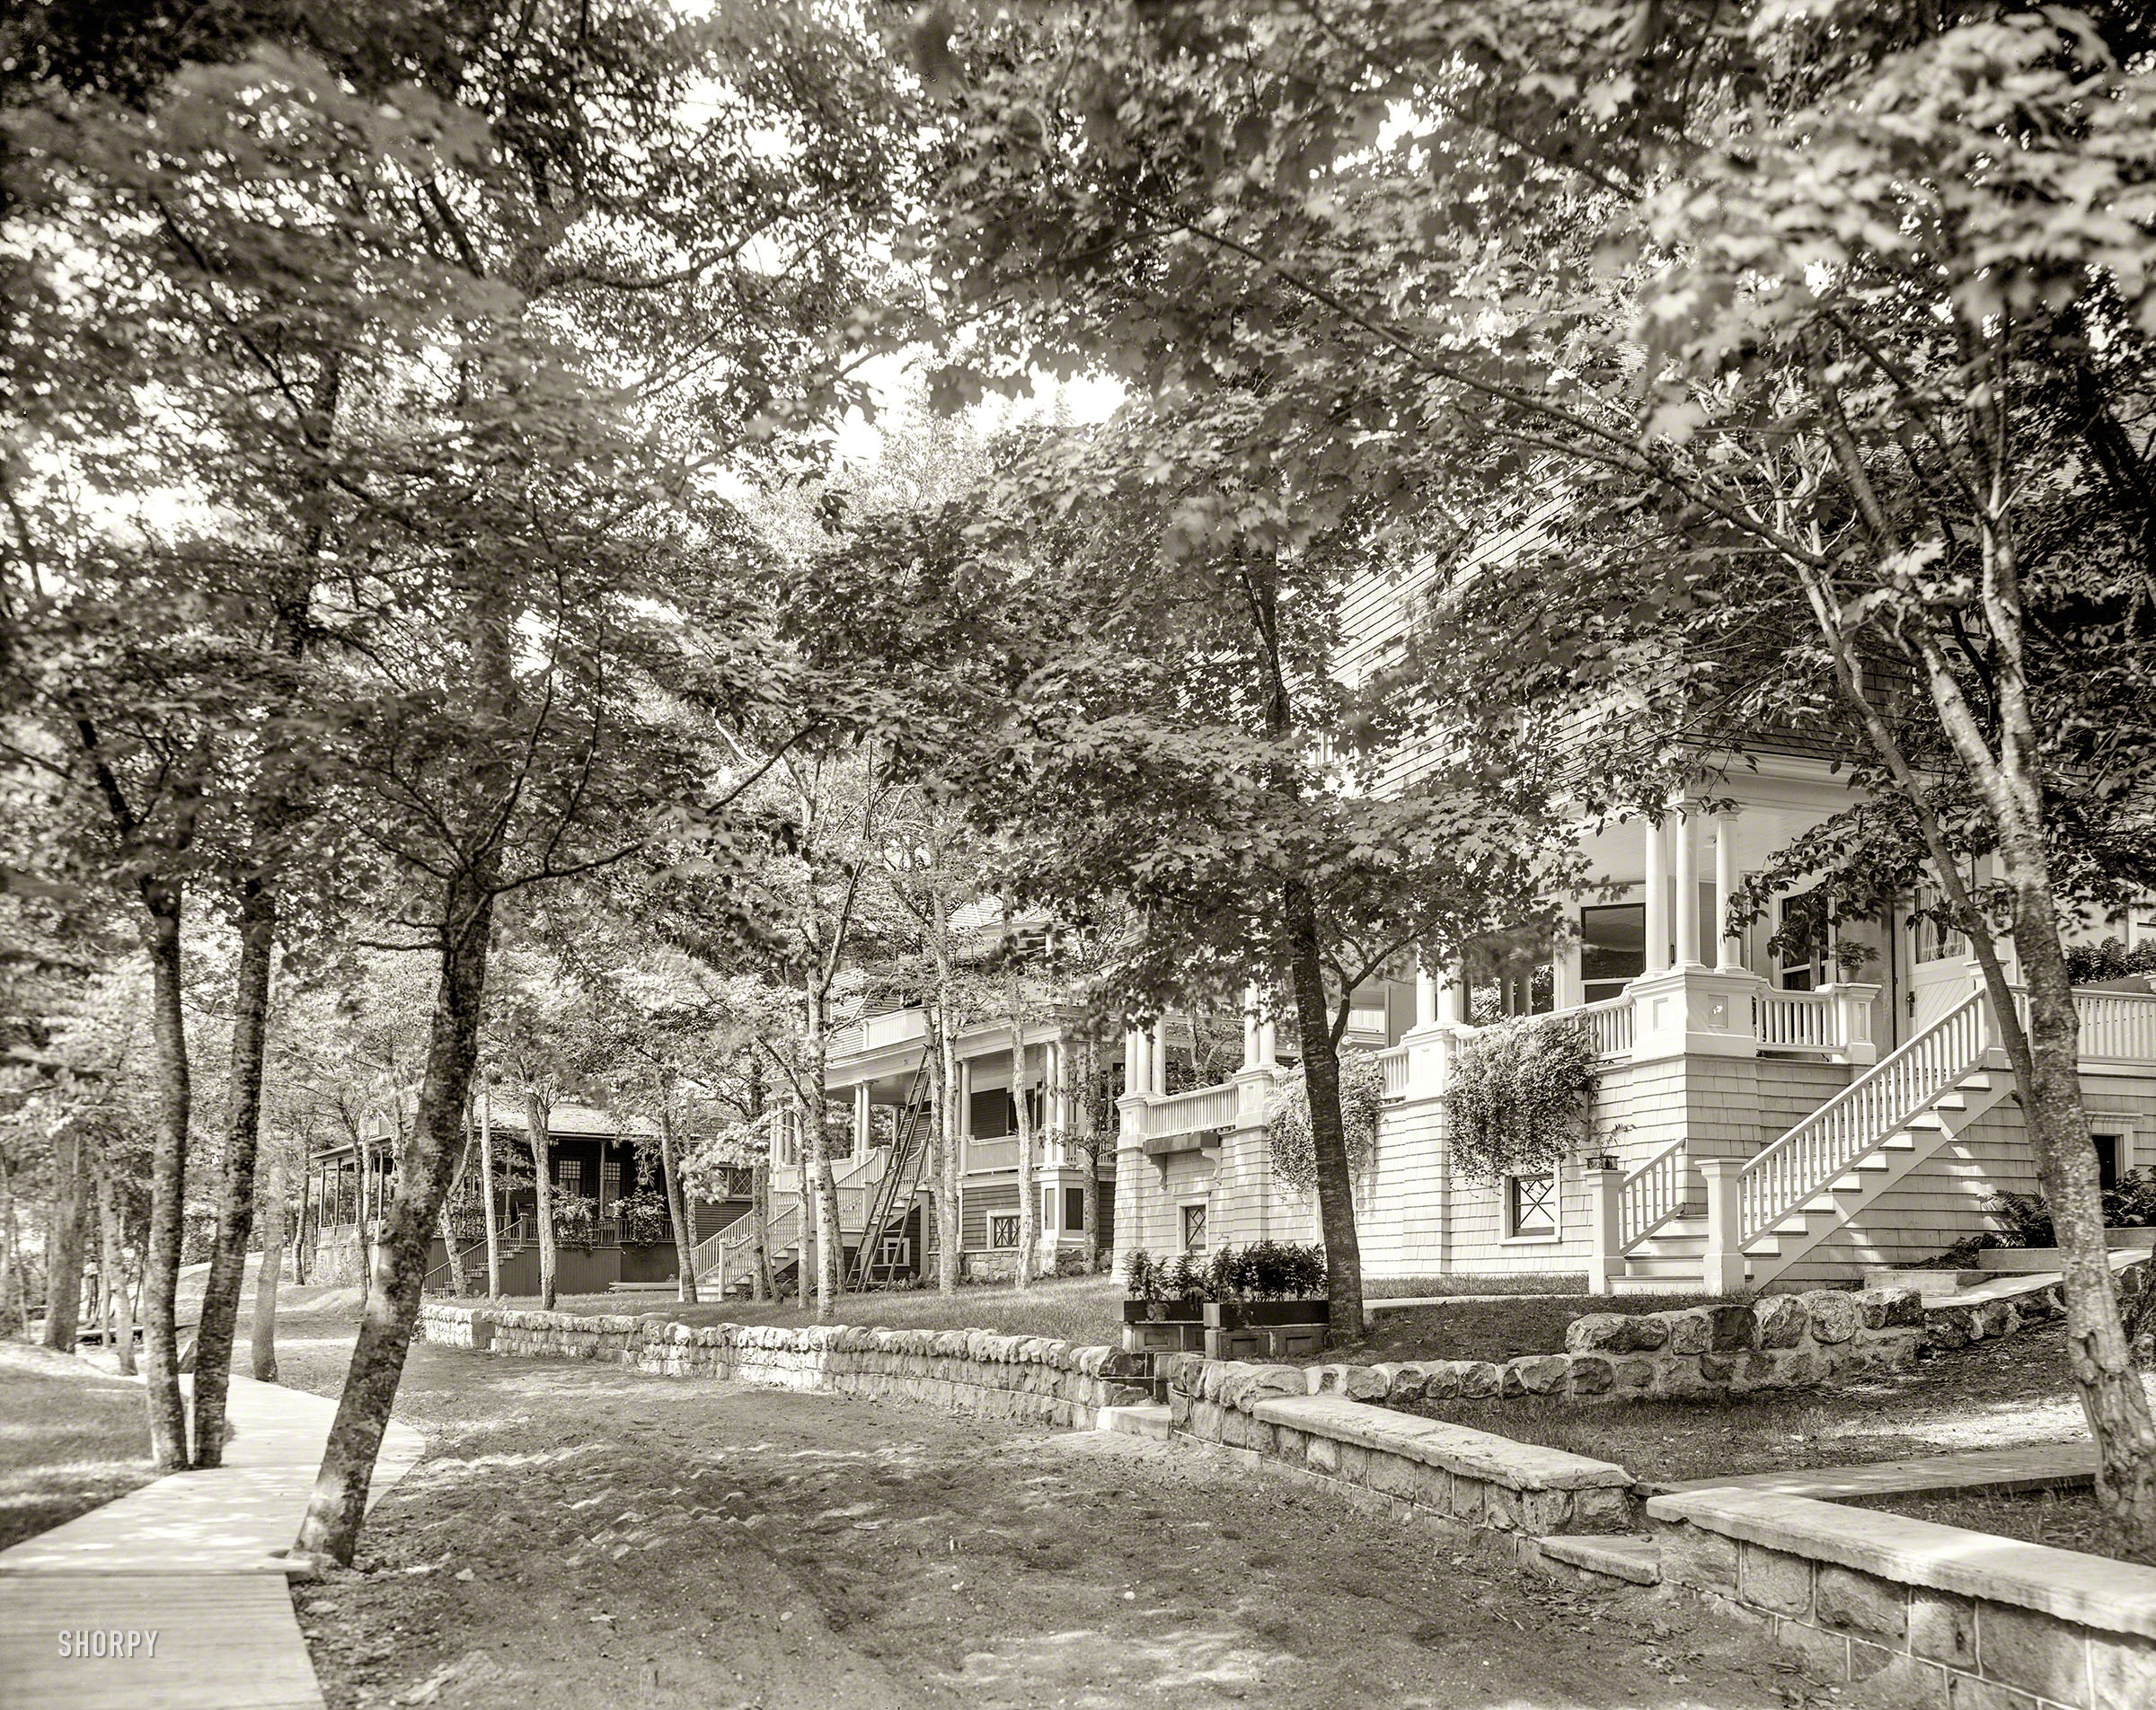 1906. "Cottages at Harbor Springs, Michigan." The resort community in its early years. 8x10 inch glass negative, Detroit Publishing Company. View full size.